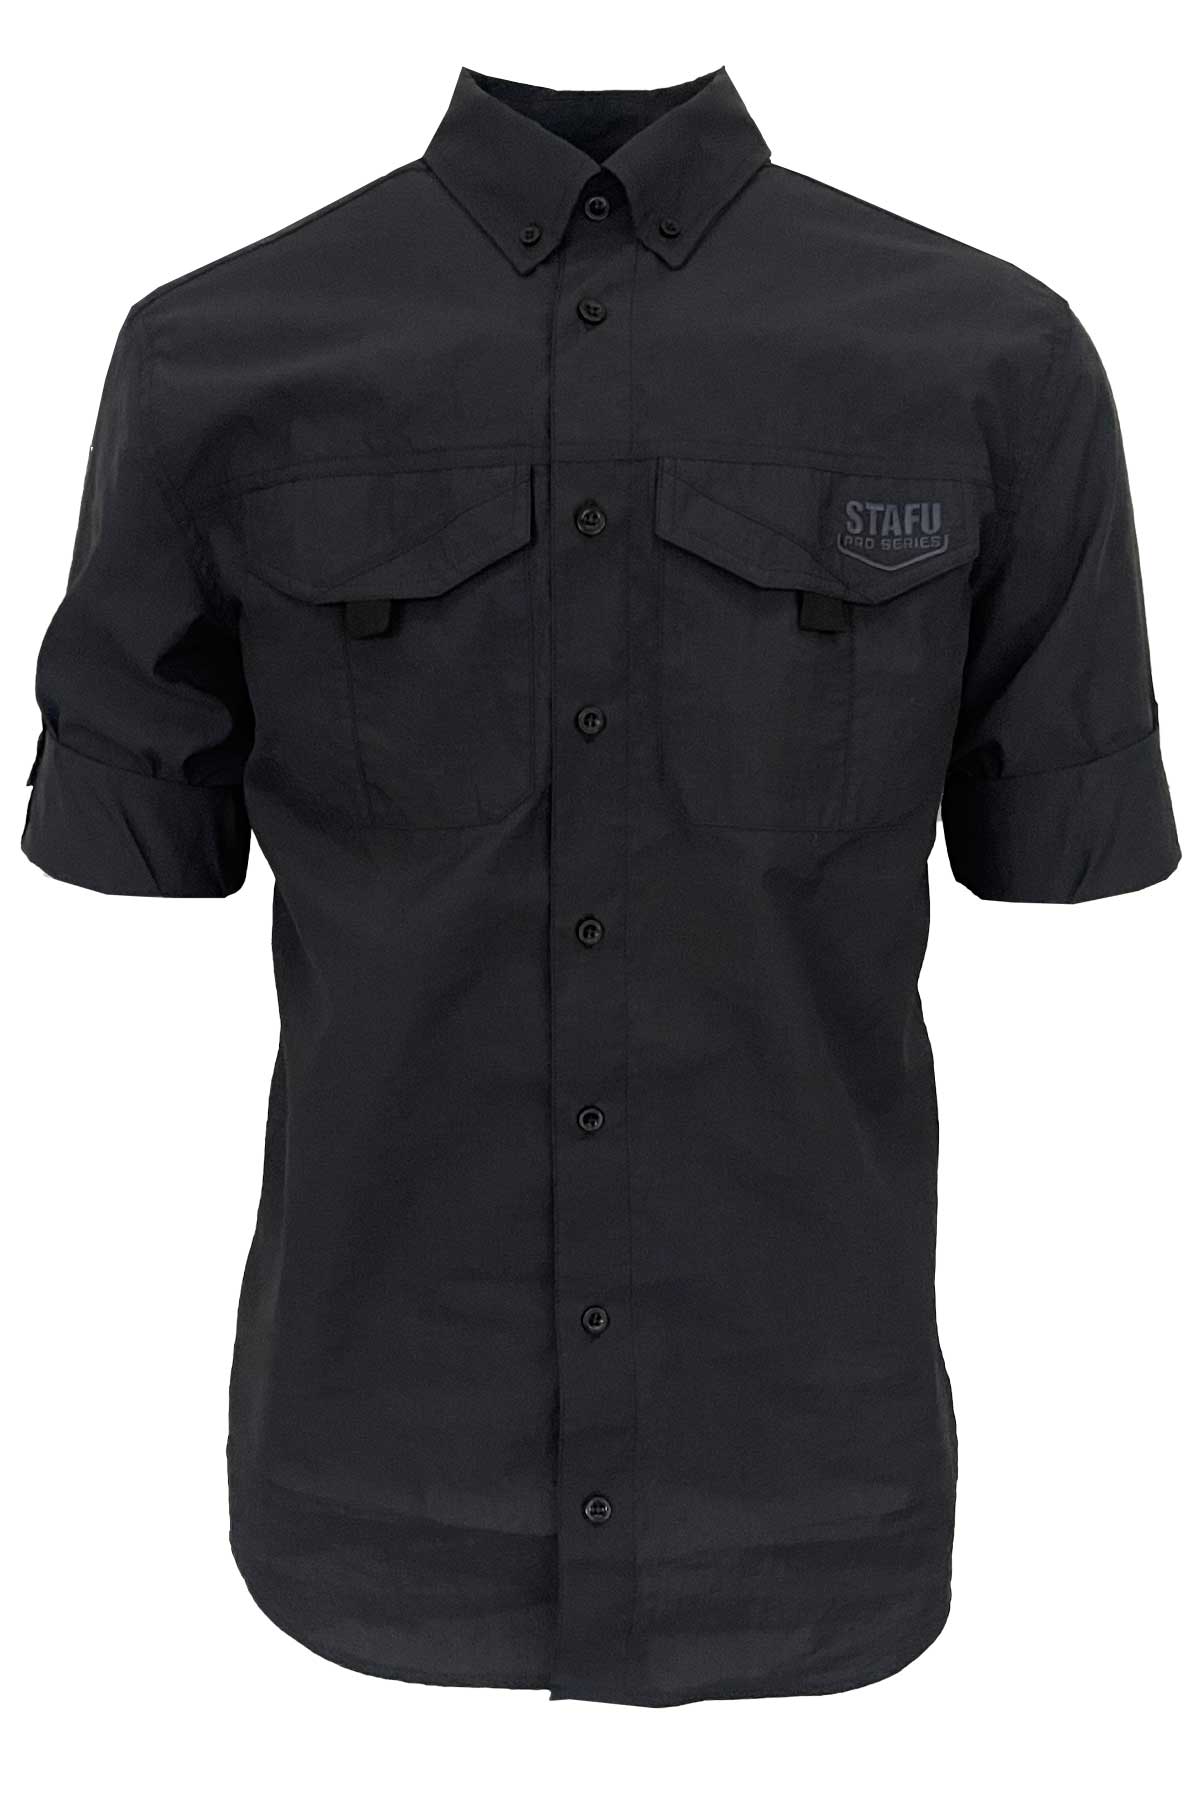 Eclipse Men's Long Sleeve Perforated Fisherman Sailor Anthracite Button-Up Shirt